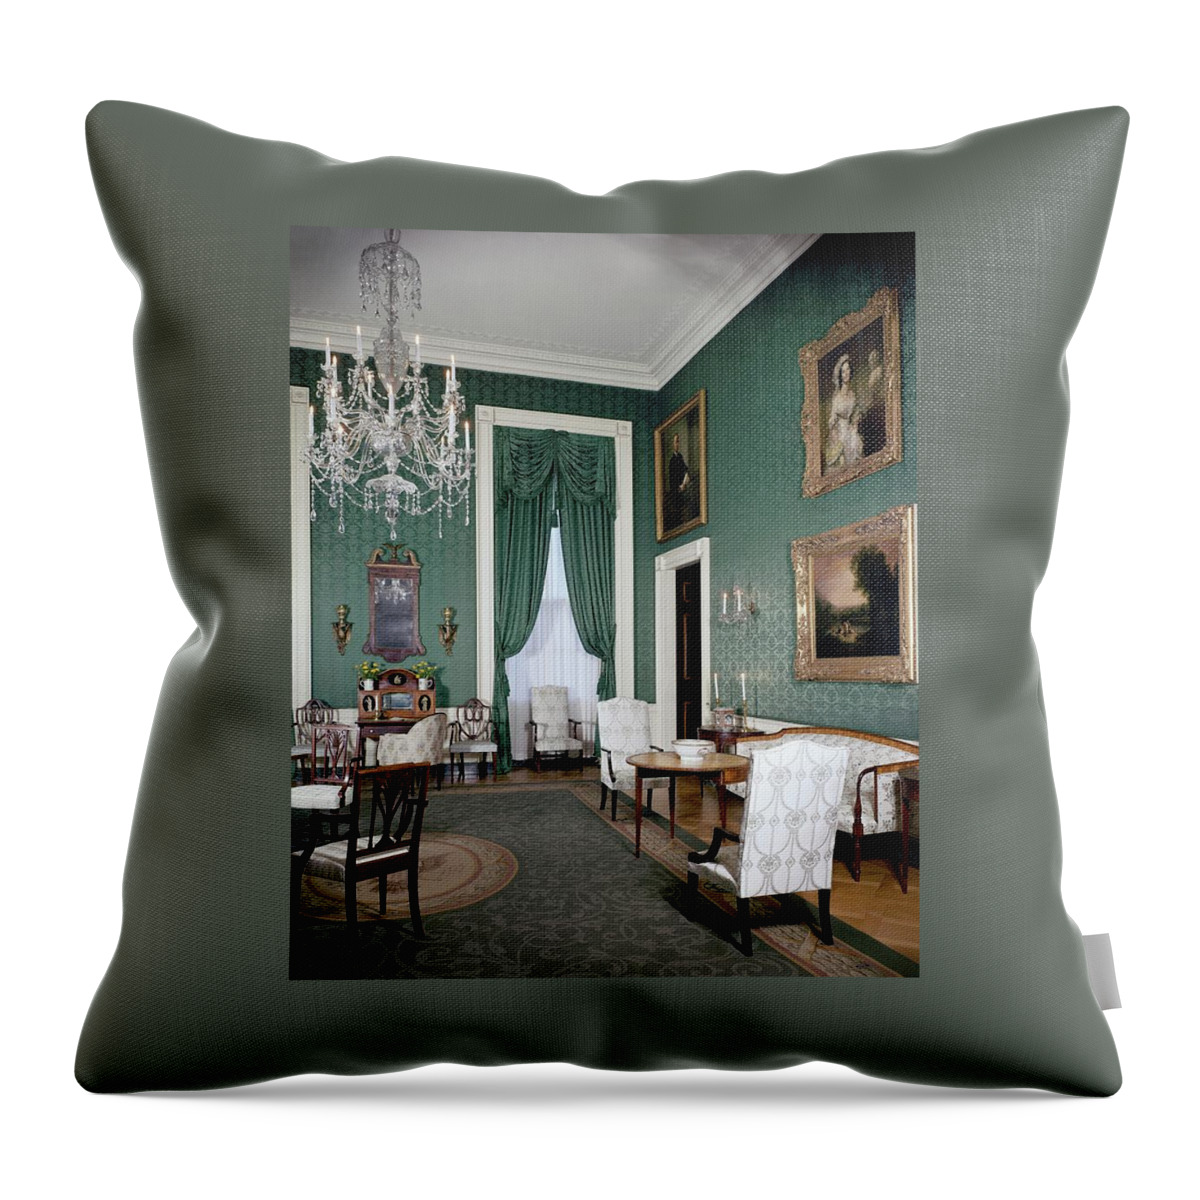 The White House Green Room Throw Pillow